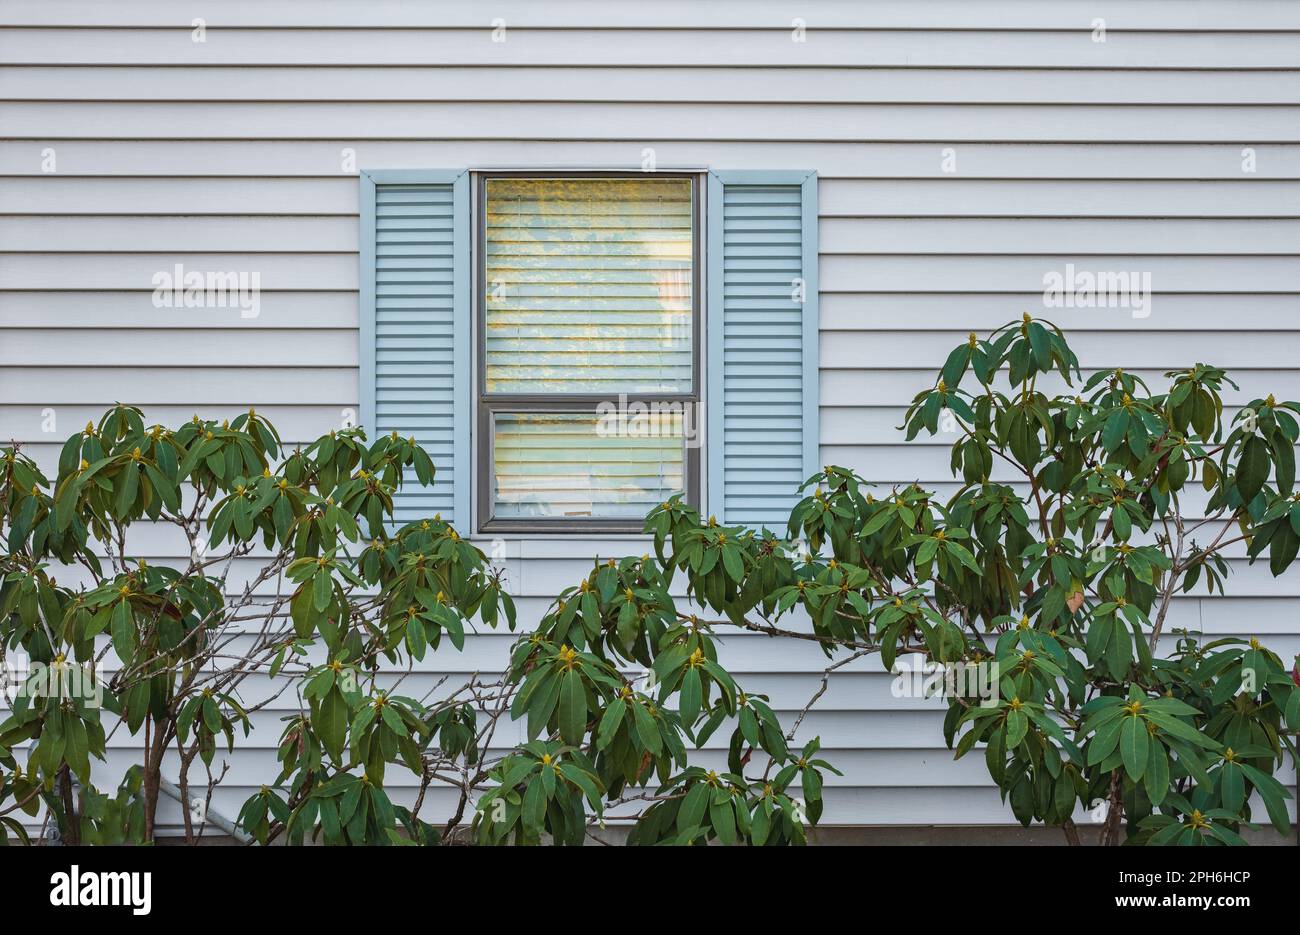 Modern residential window with shutters and trees in a garden. Glass window frame house exterior on white wall. Nobody, street photo. Garden with gree Stock Photo